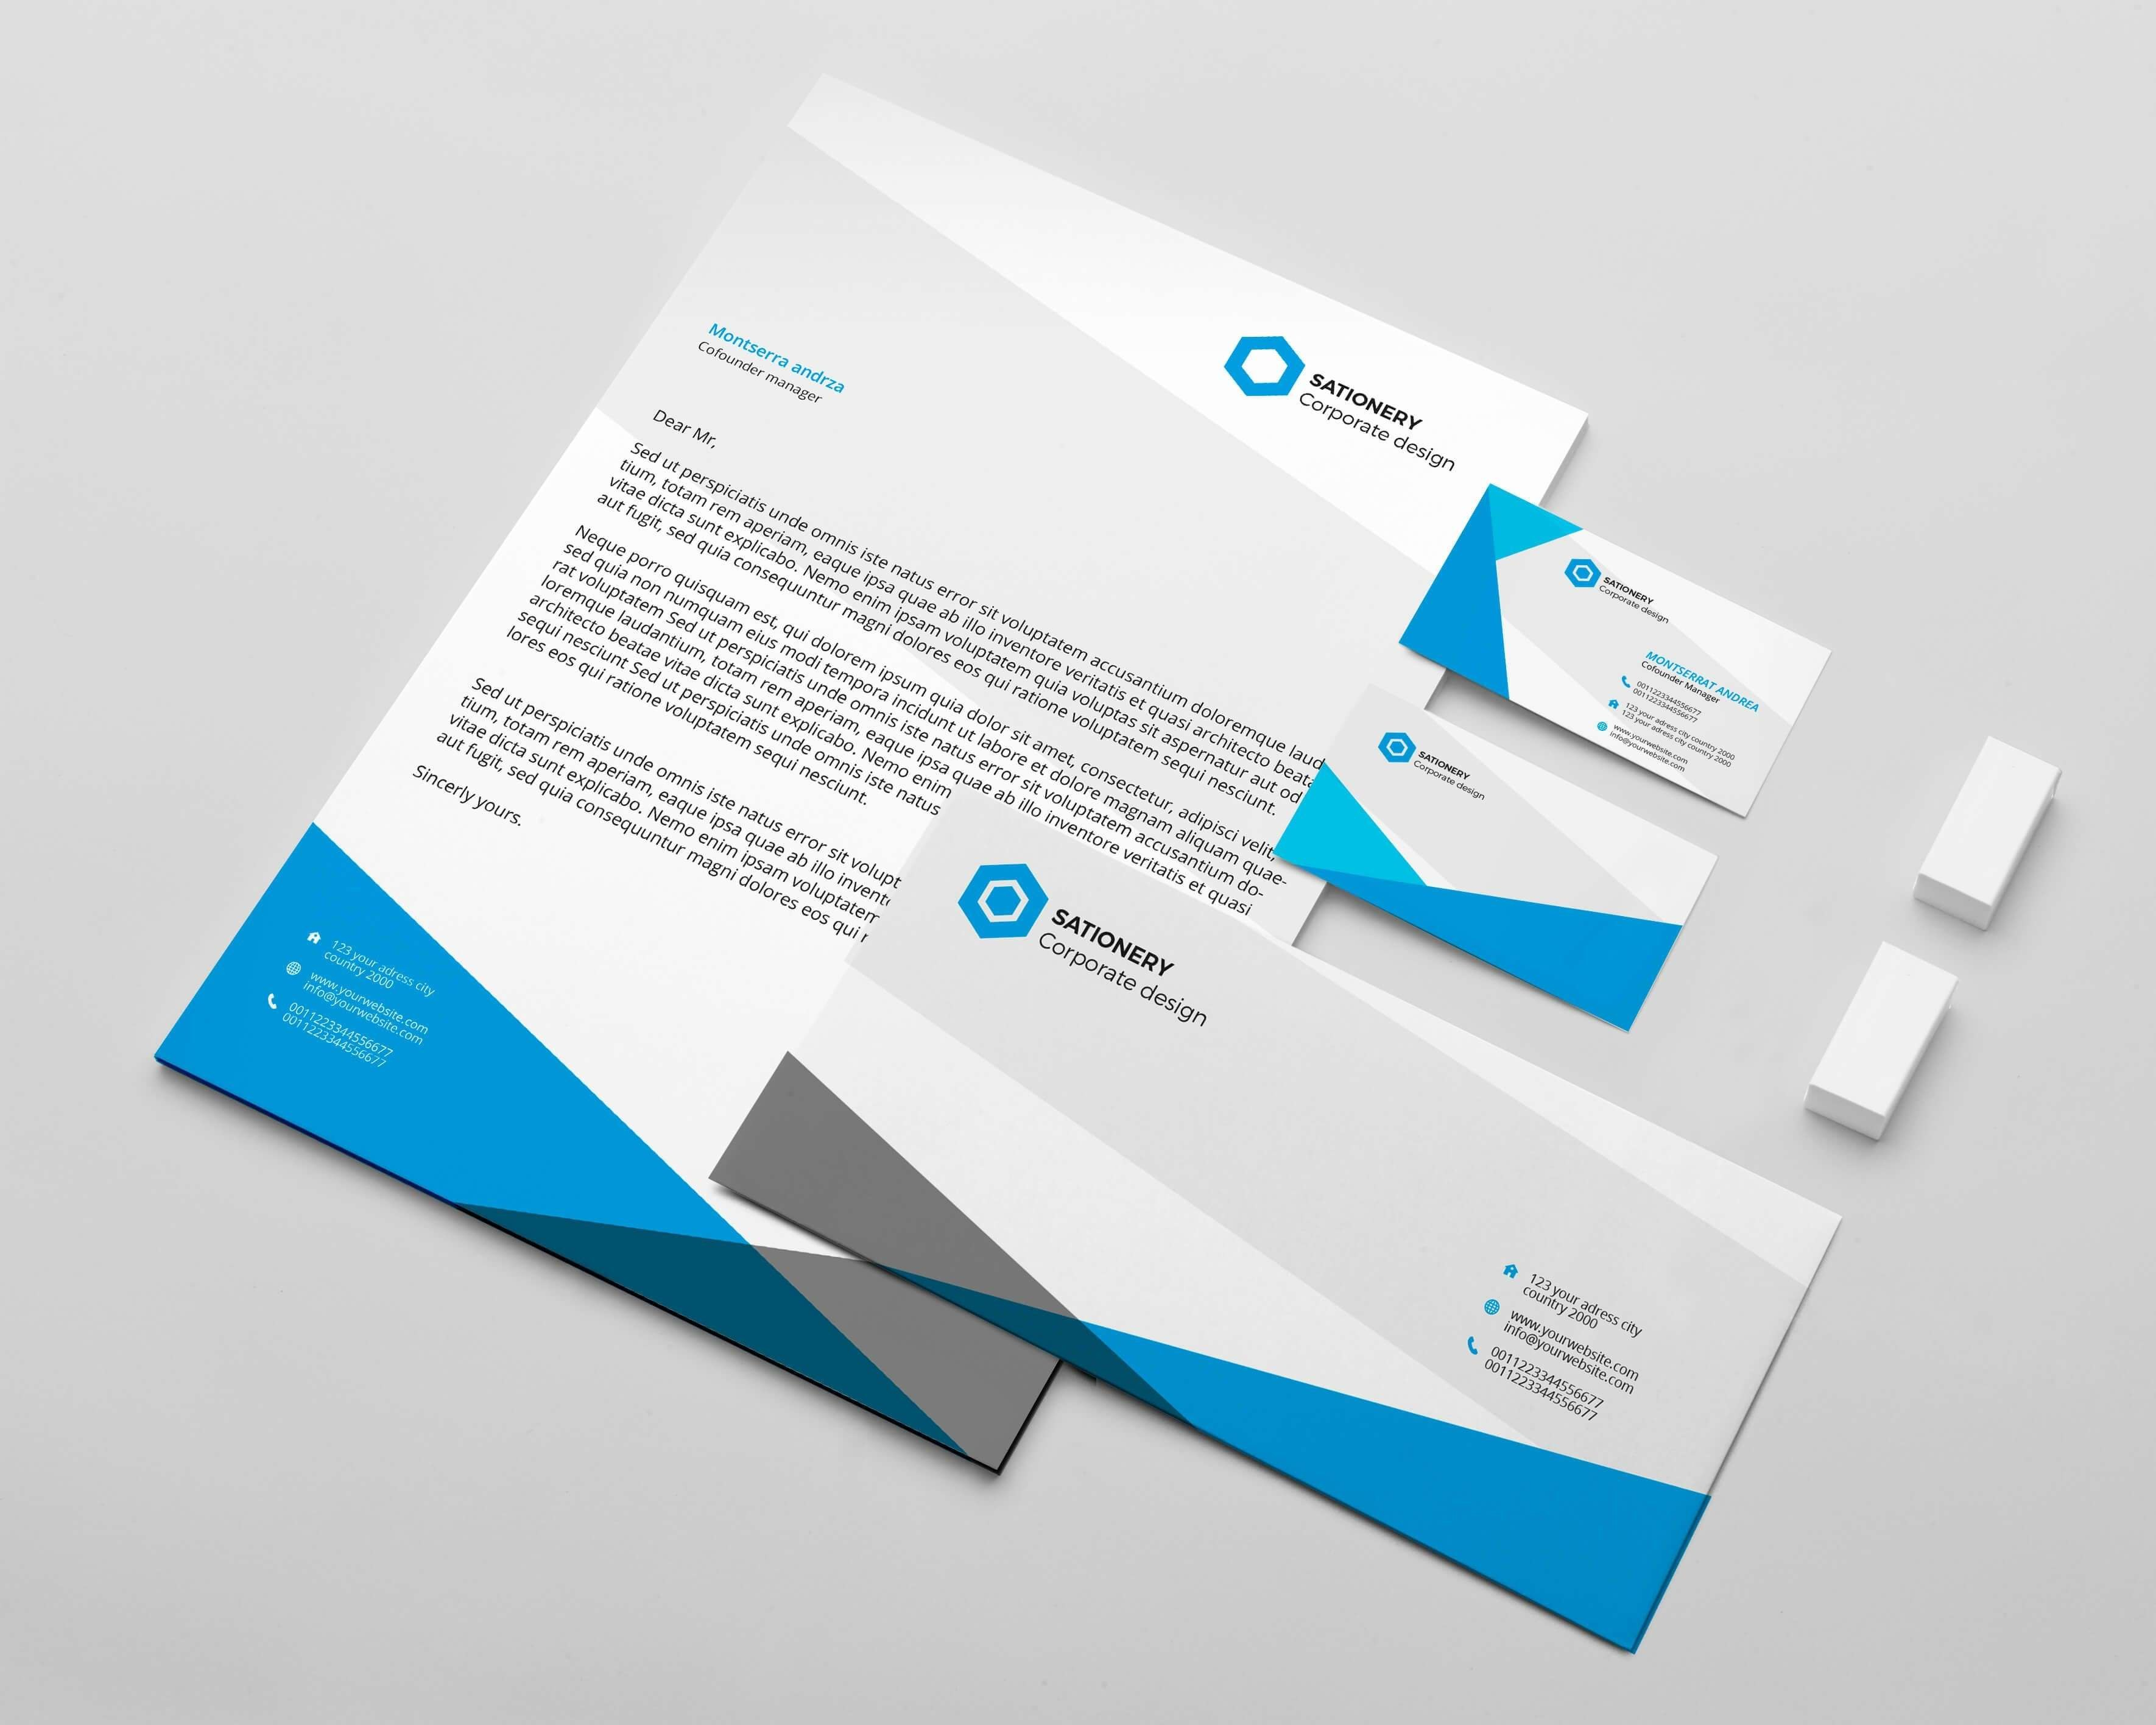 Business Card Size Template Psd New Letterhead Design Templates Shop with regard to Business Card Size Psd Template